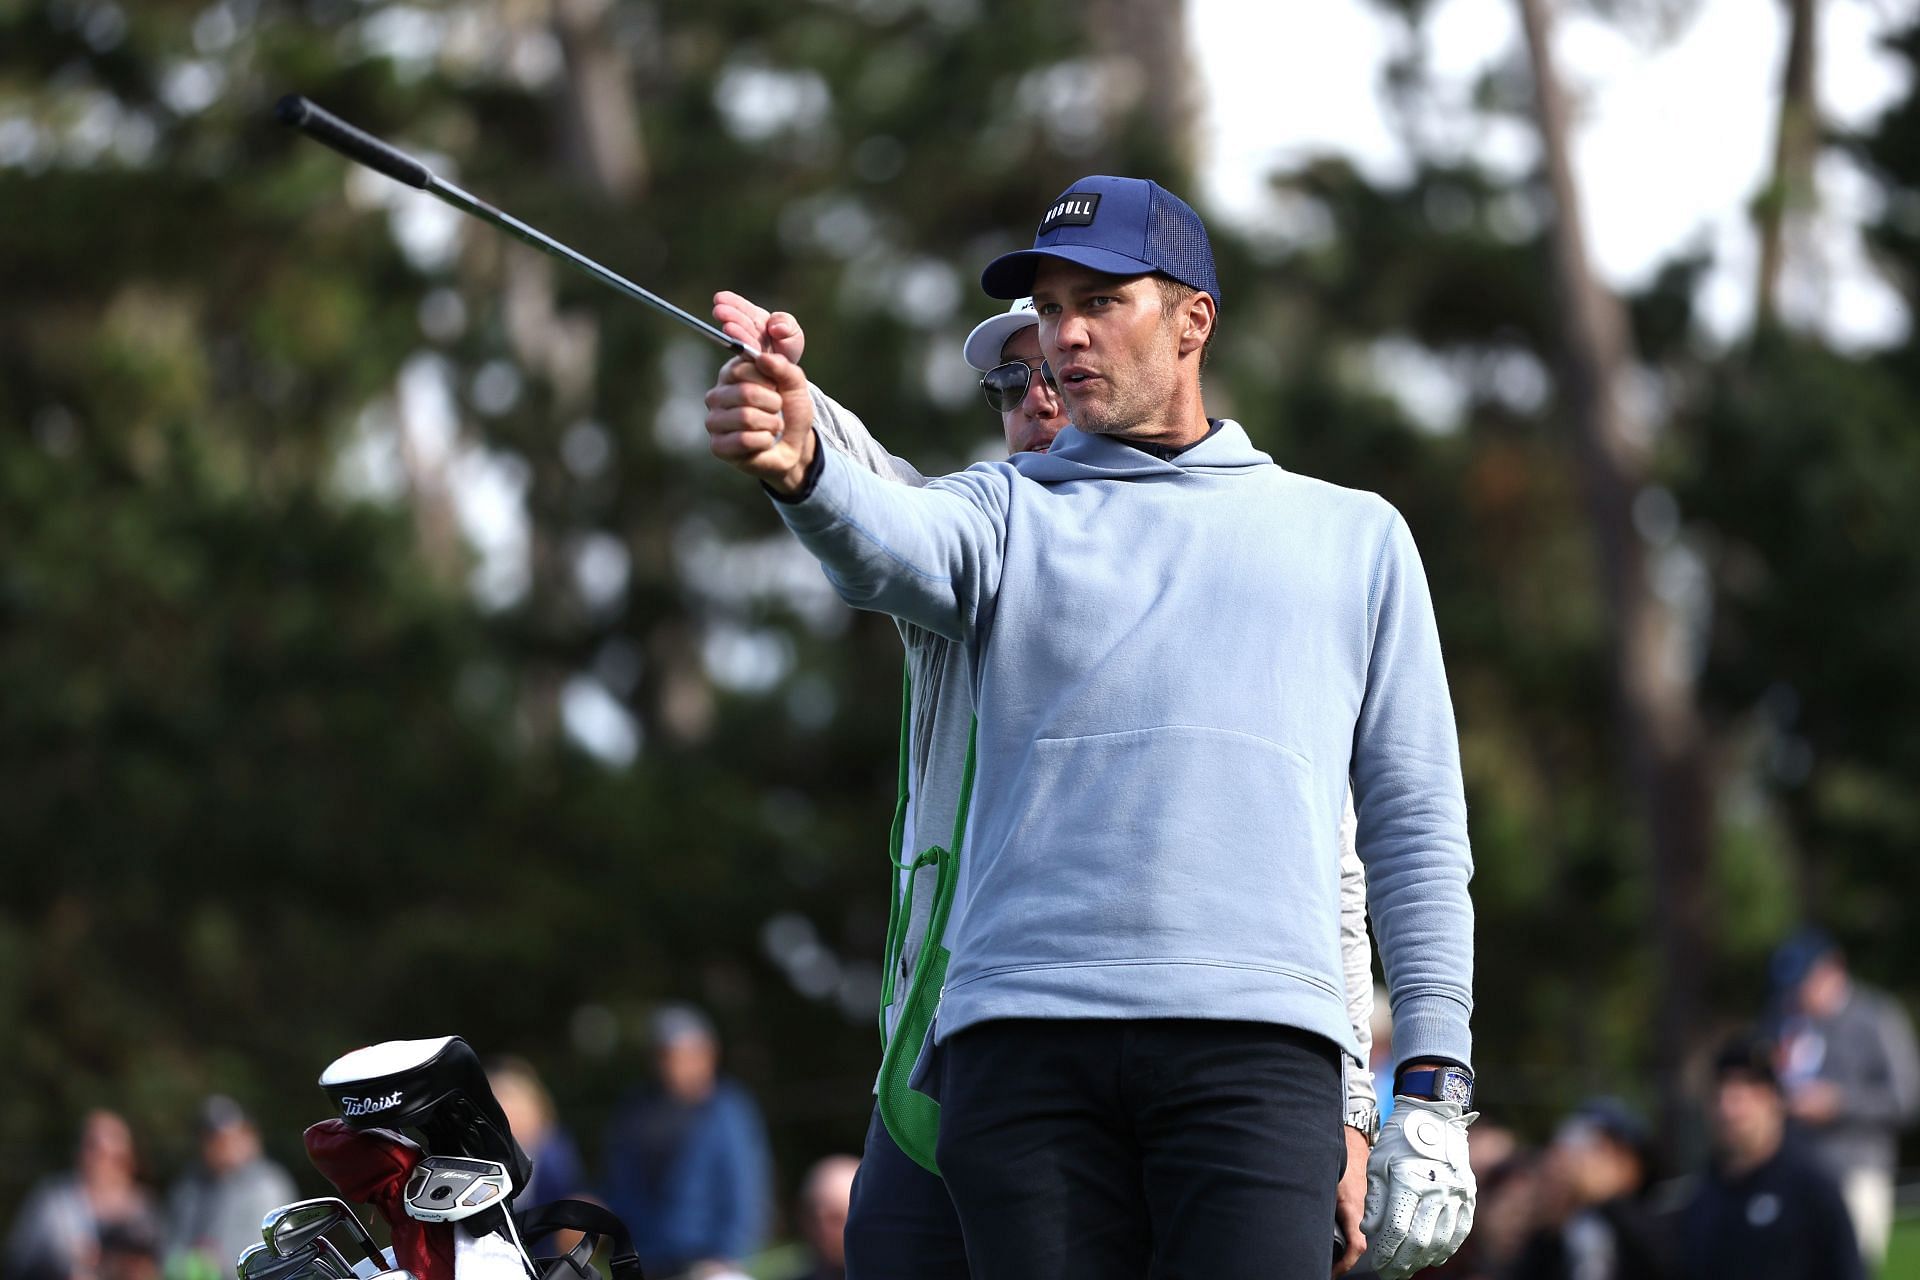 Tom Brady lost to Rory McIlroy at the pro-am in February